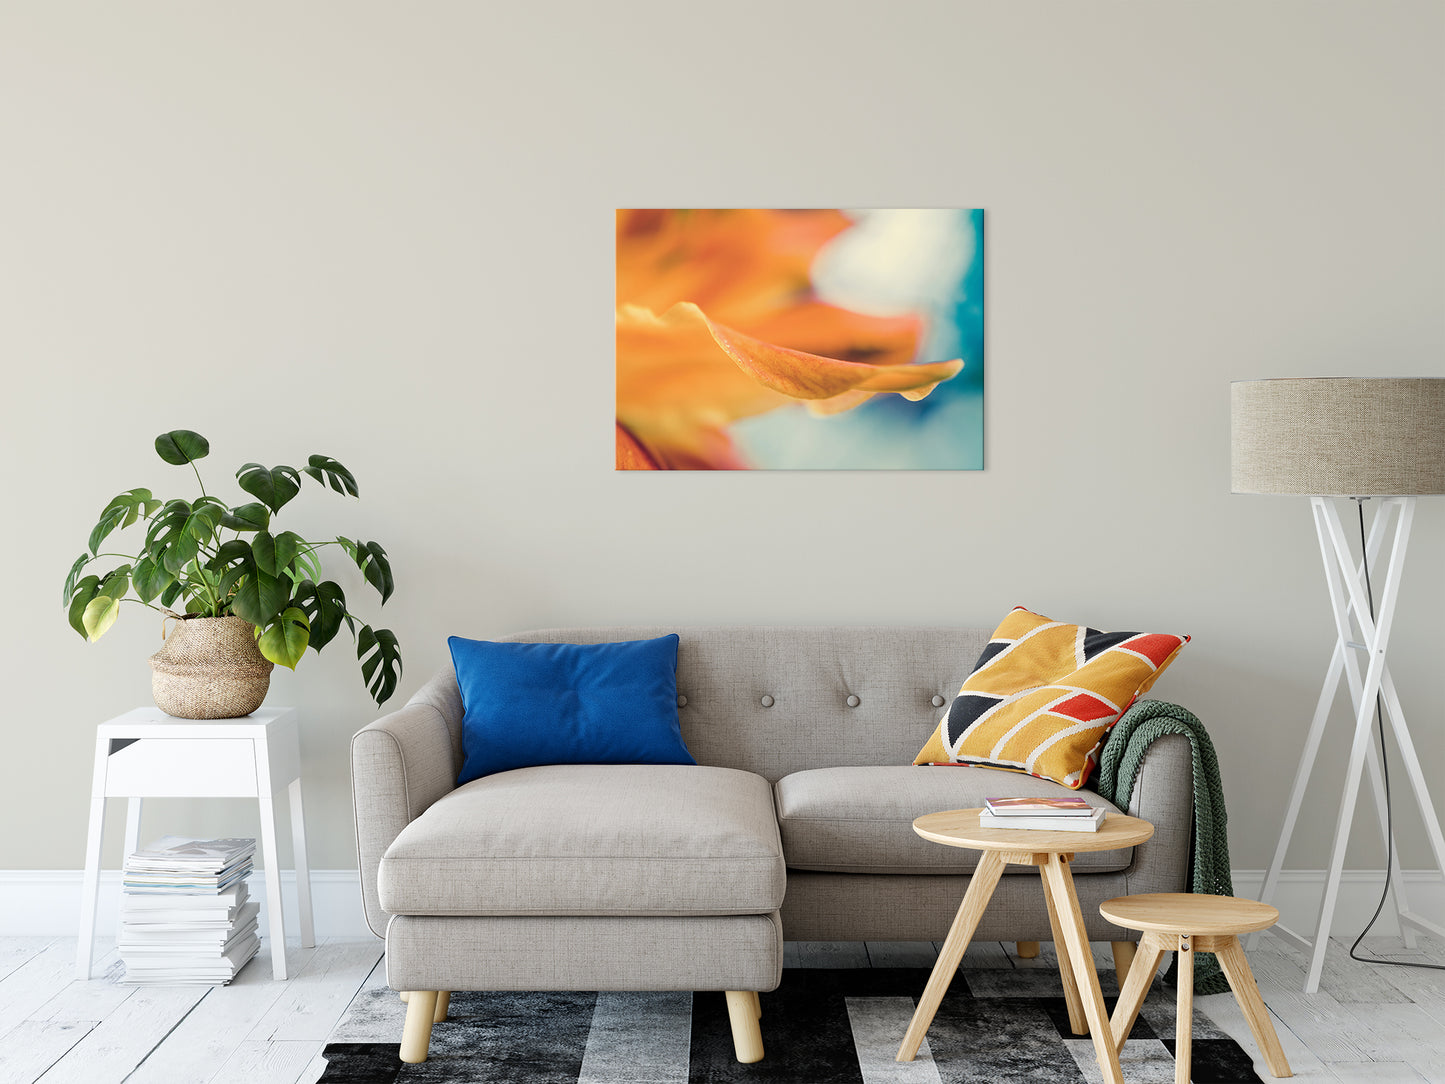 Serene Petals of Life Nature / Floral Photo Fine Art Canvas Wall Art Prints 24" x 36" - PIPAFINEART